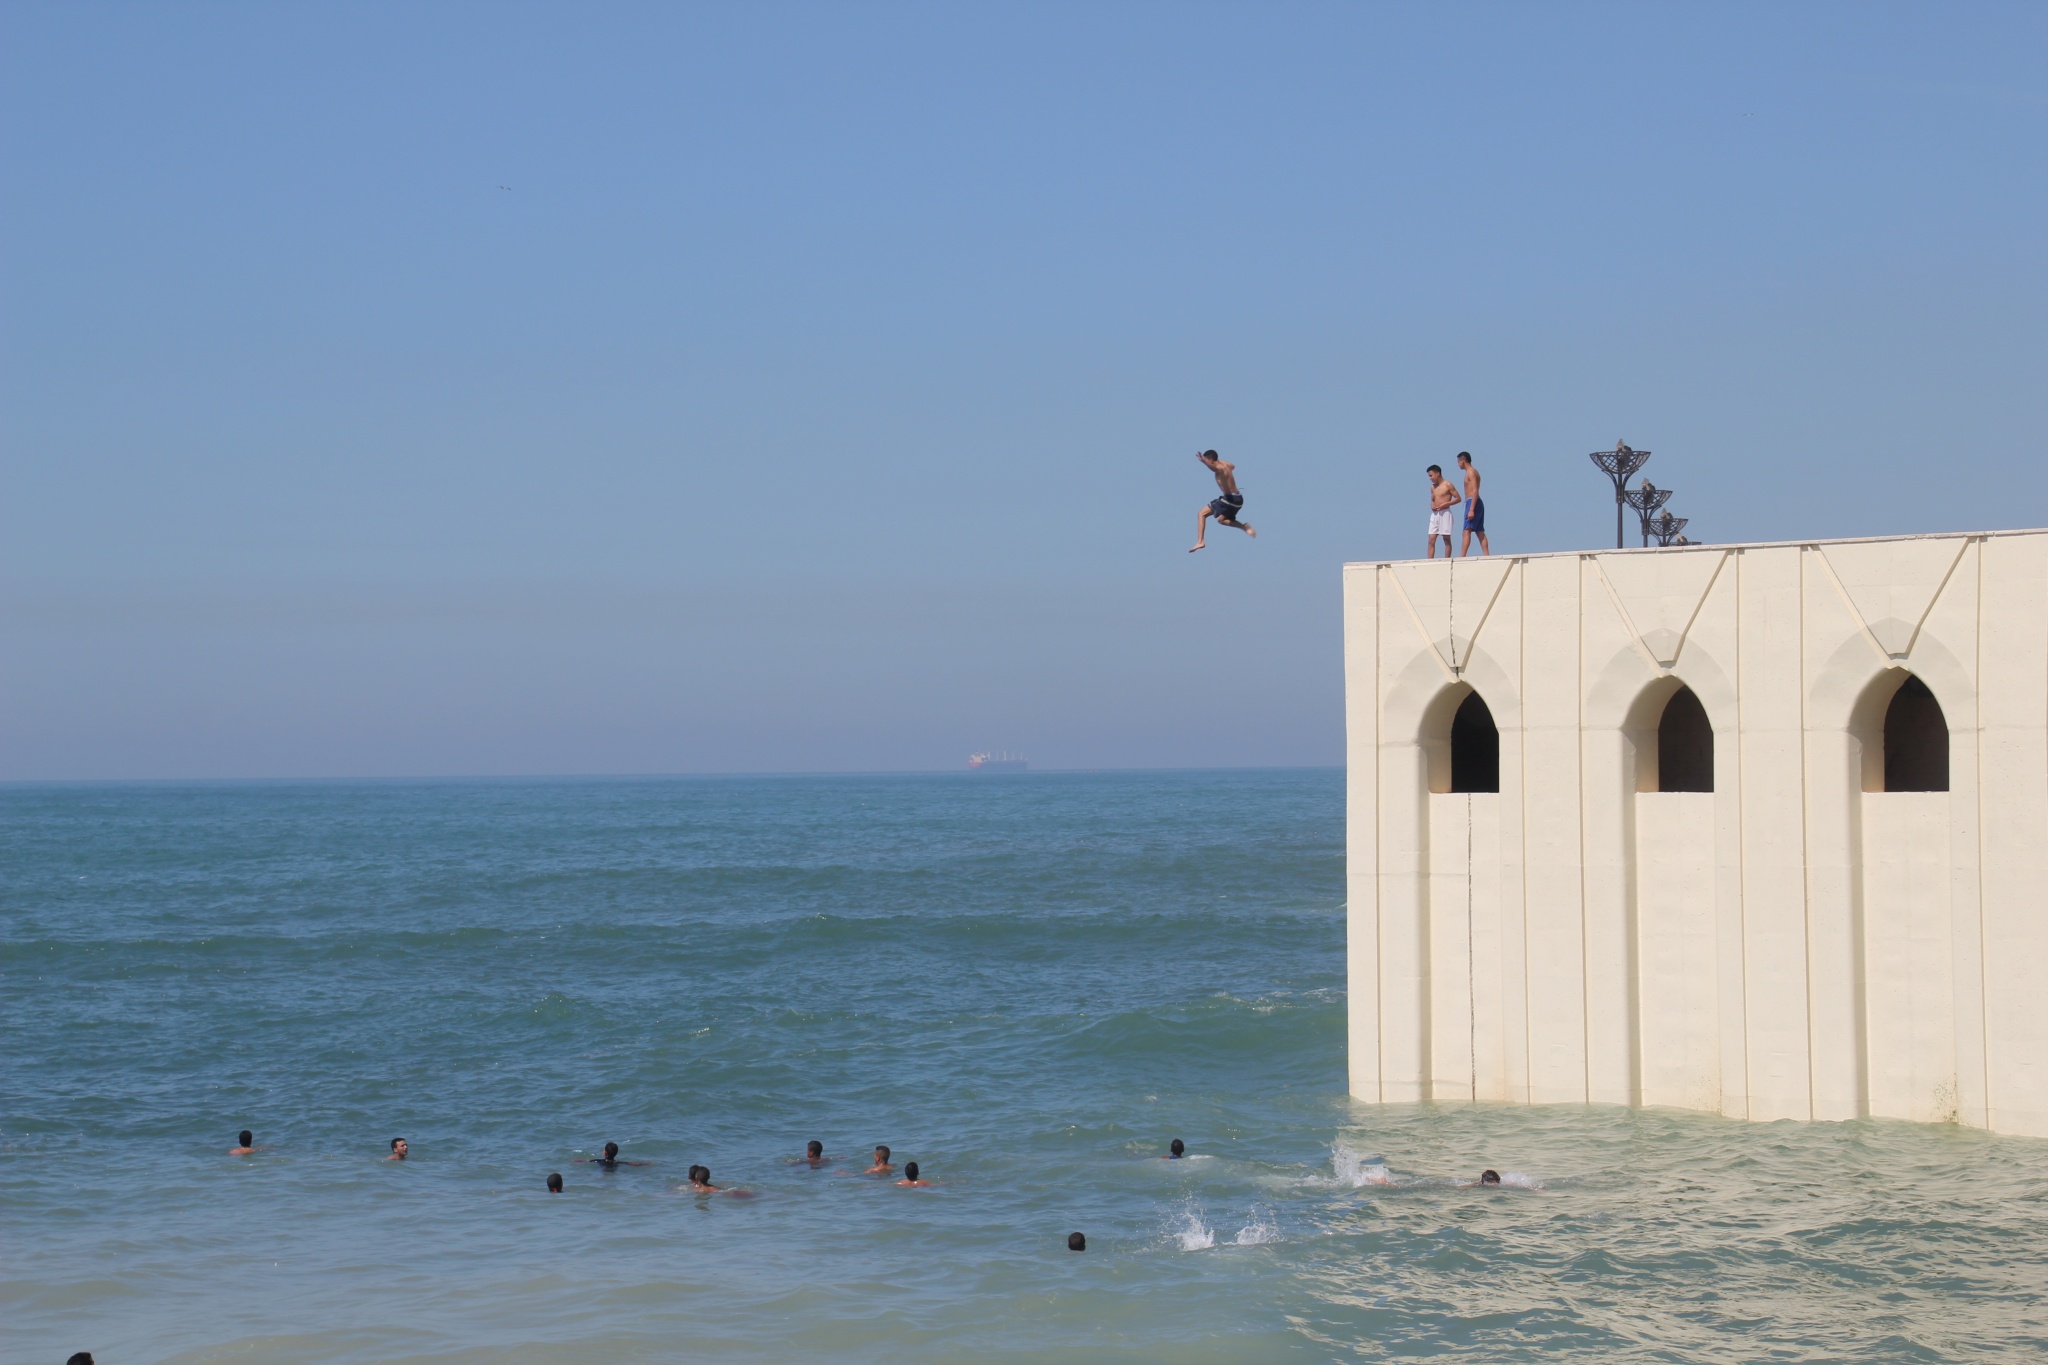 Kids jumping into water near King Hassan II Mosque